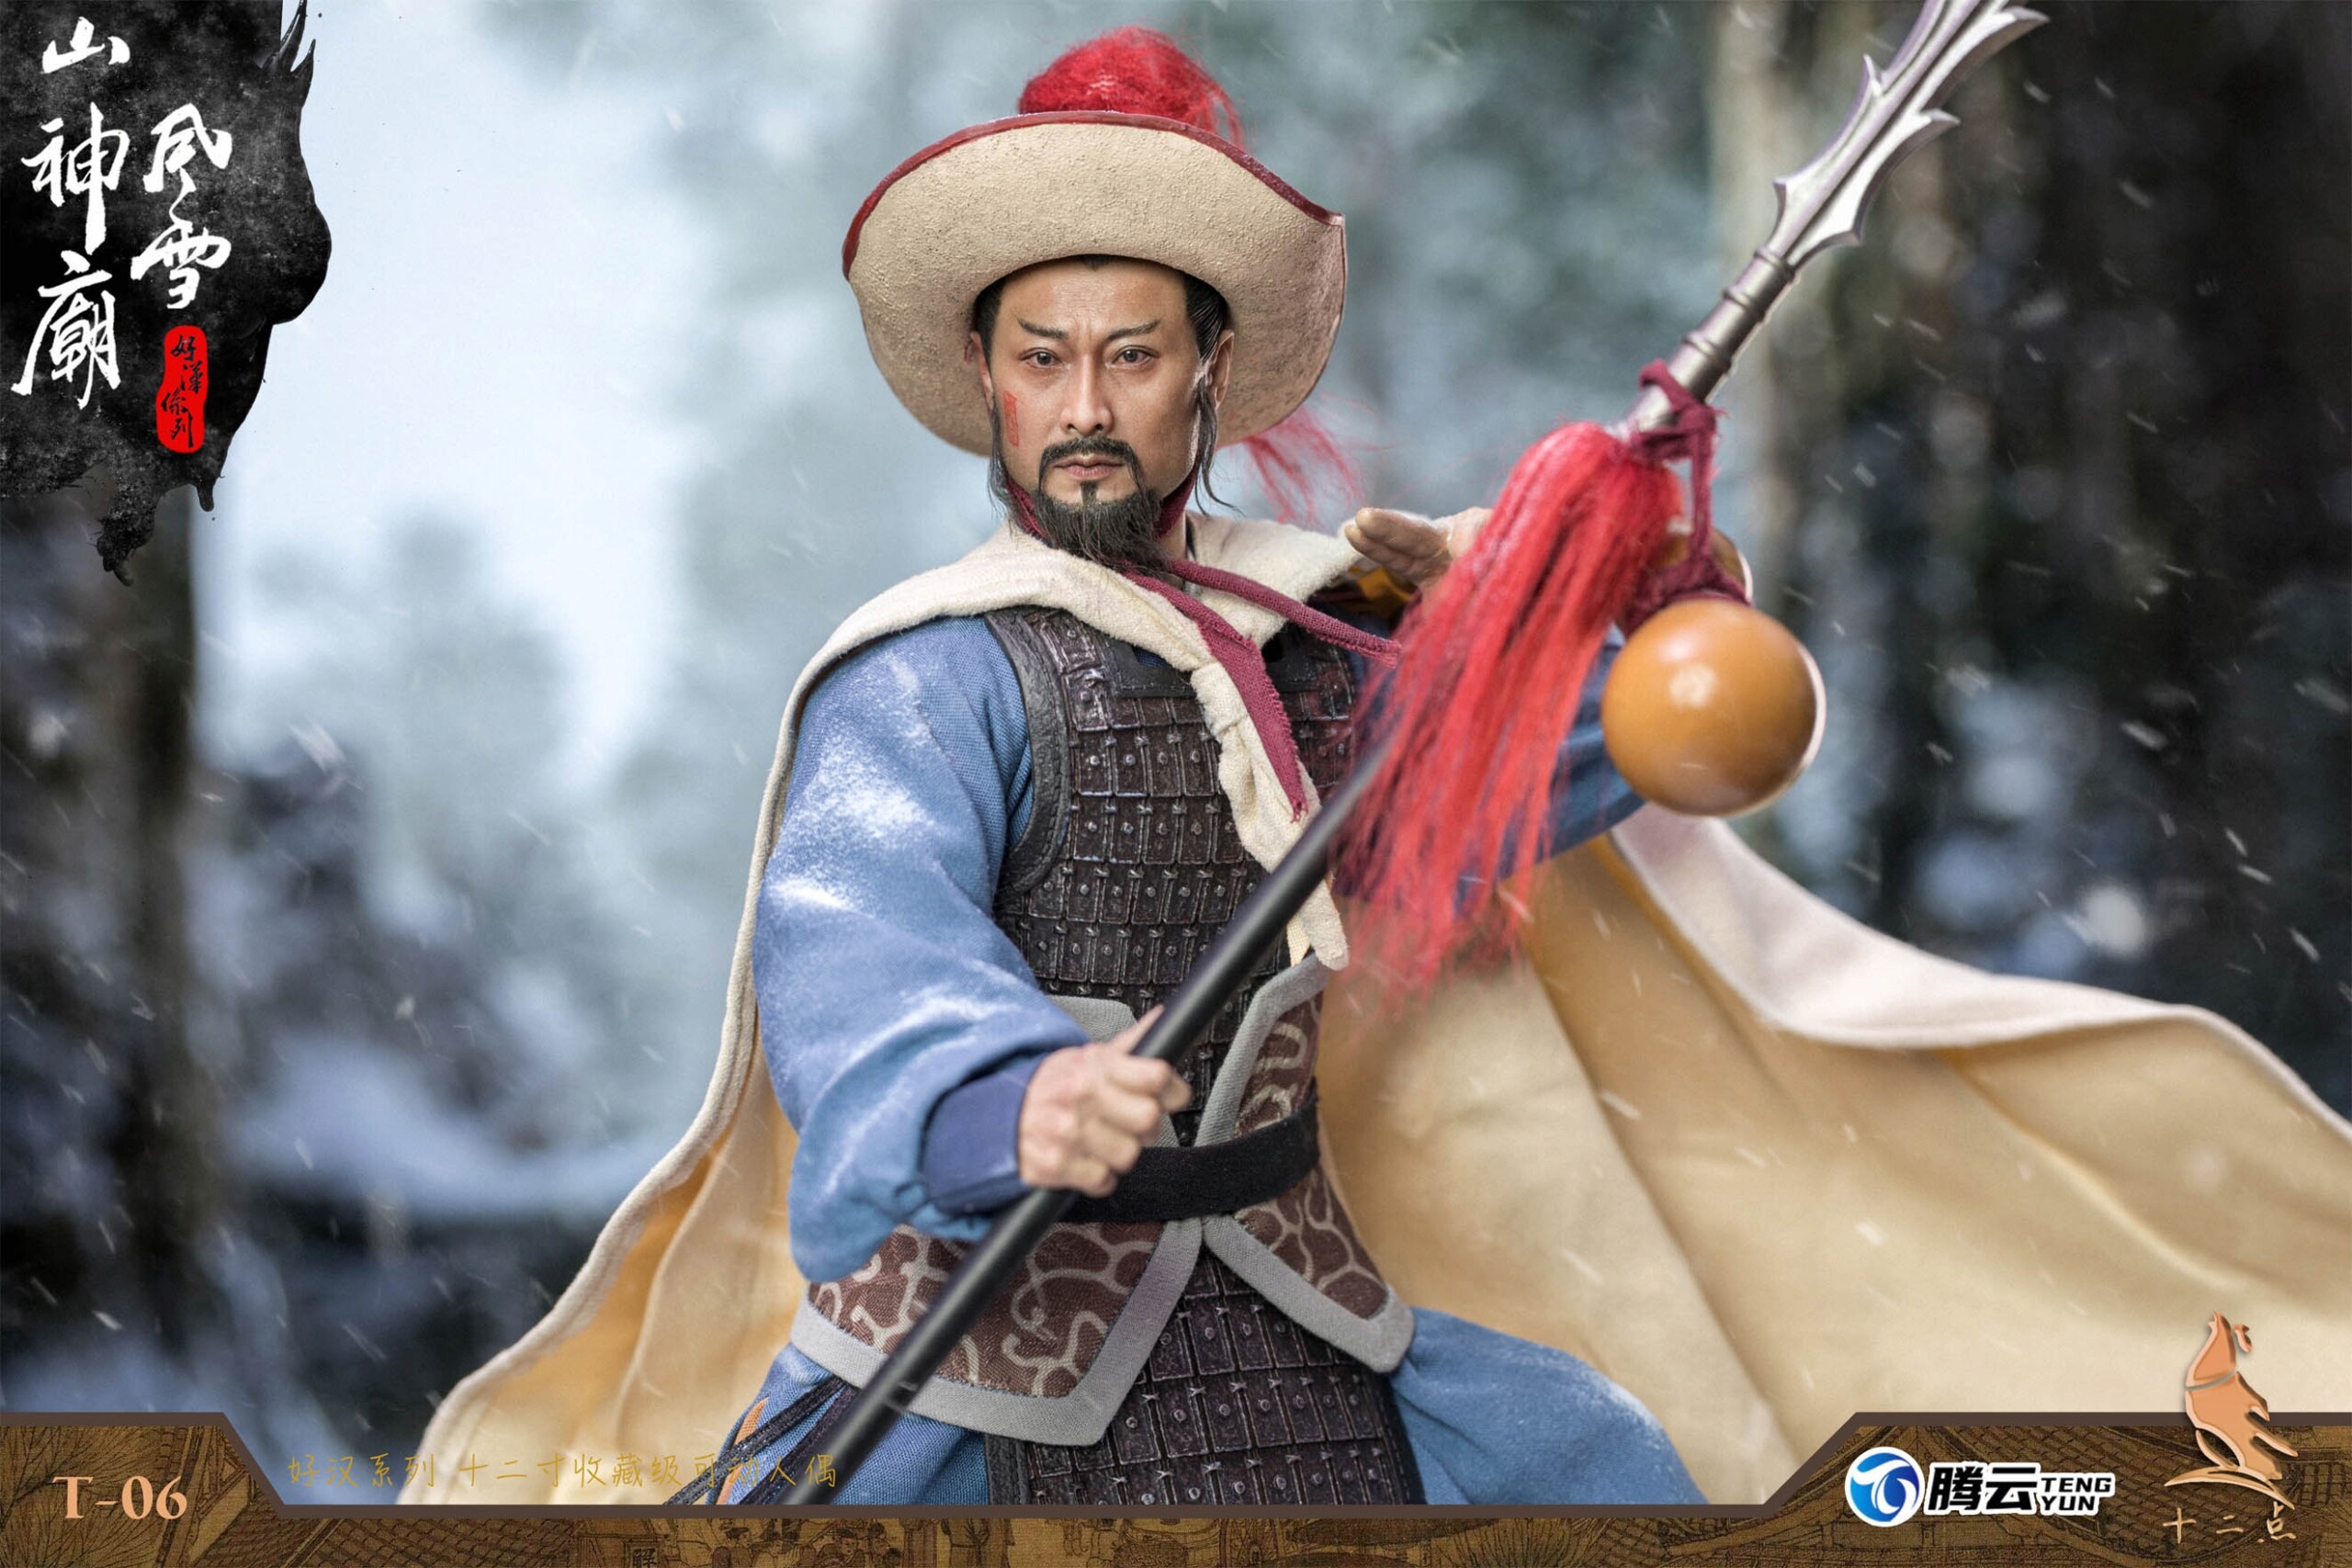 NEW PRODUCT: Twelve - Hero Series - Leopard Head Lin Chong Fengxue Mountain Temple Action Figure (T-05 /T-06) 2530